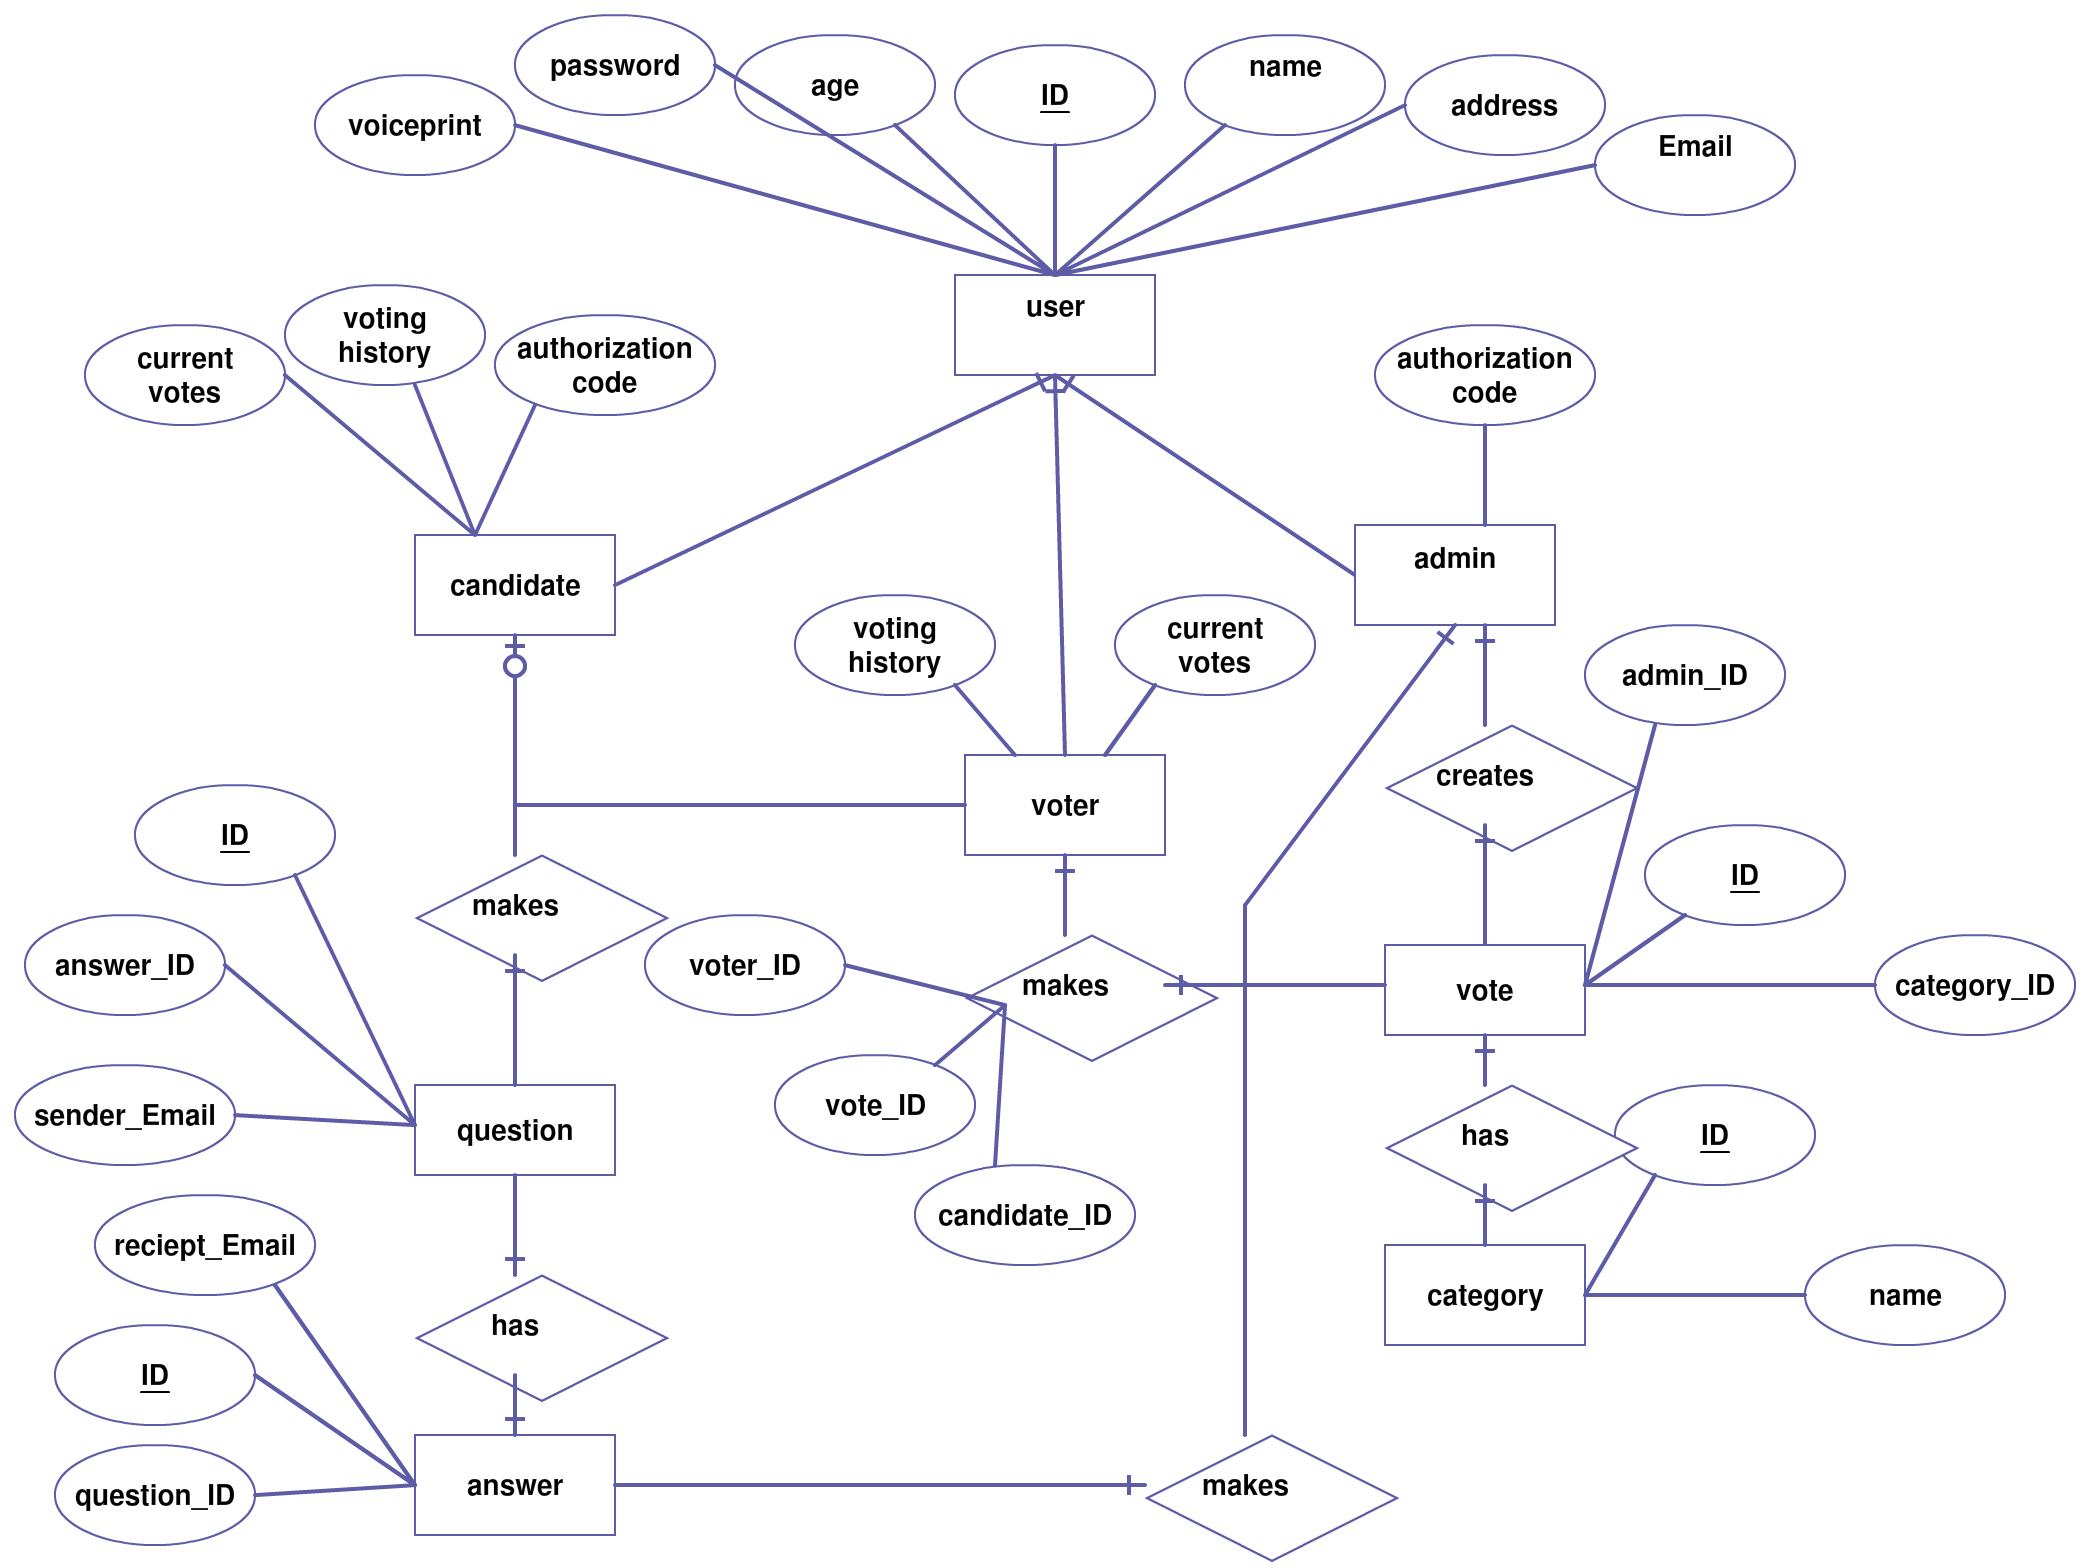 Pin On Entity Relationship Diagram Templates in Entity Relationship Diagram Online